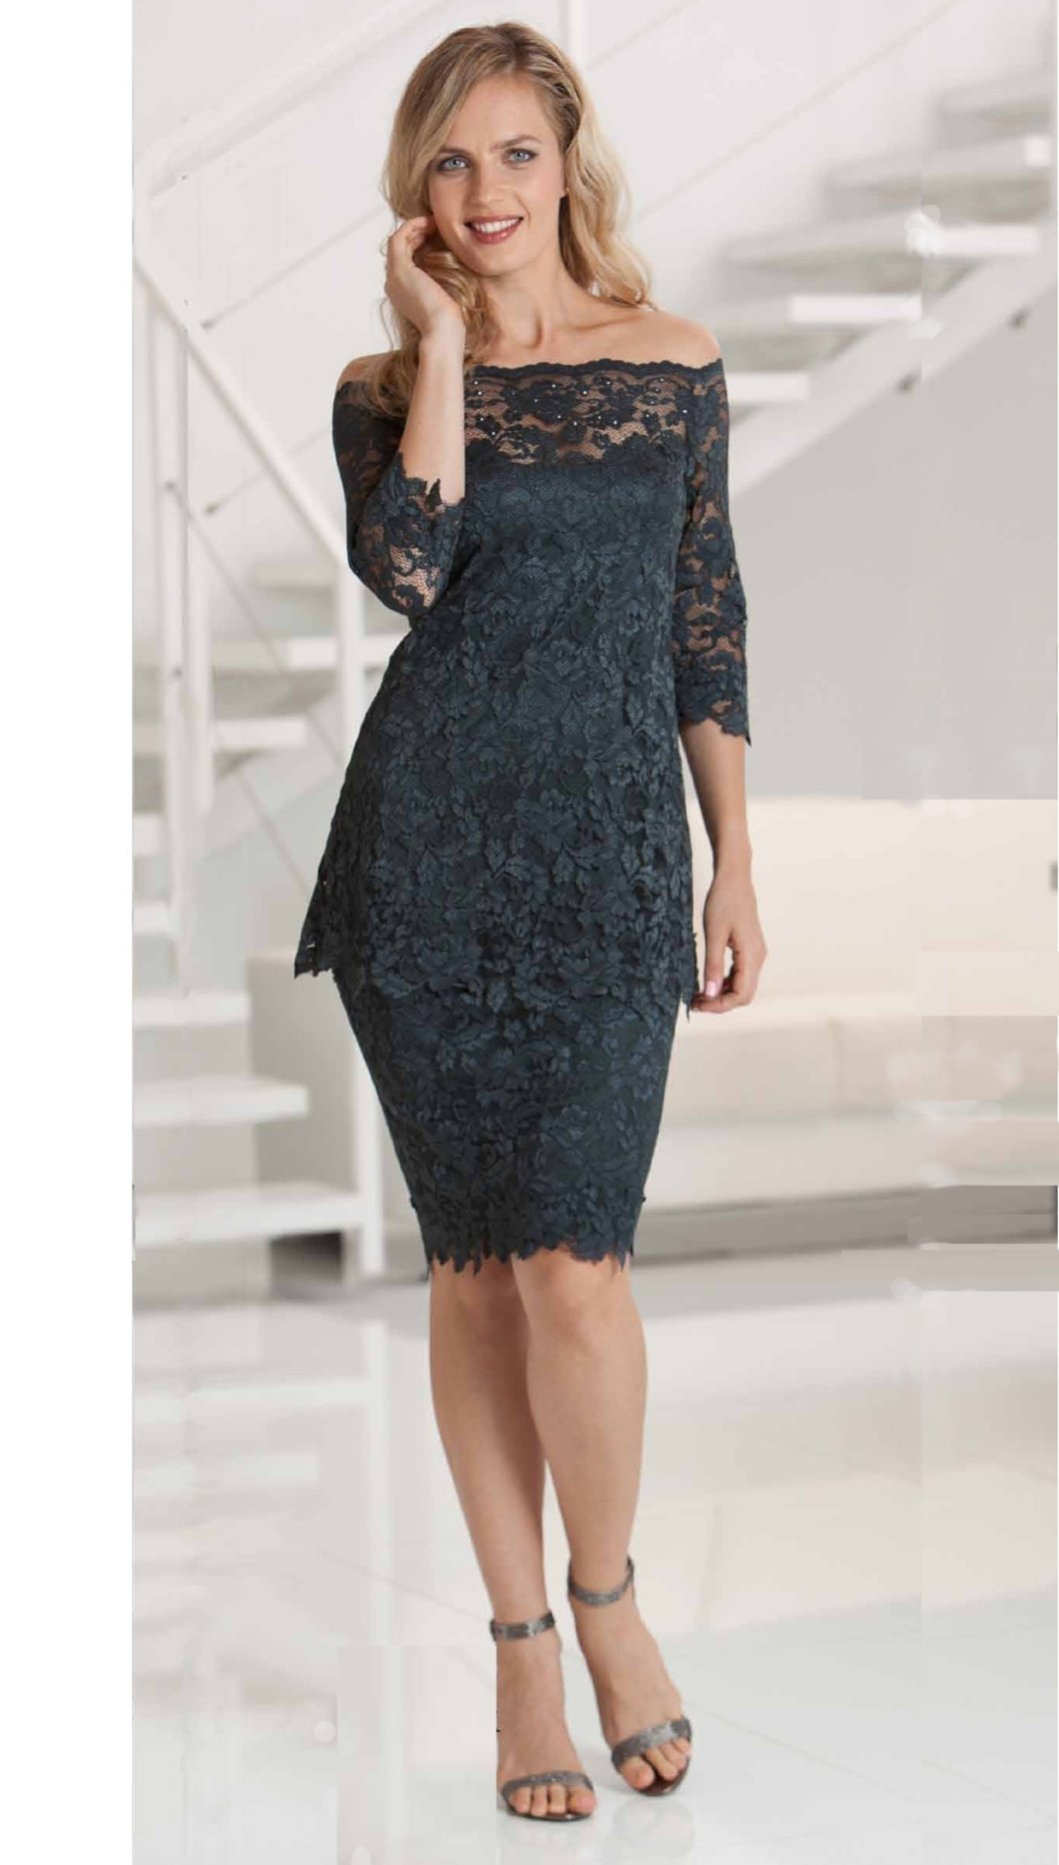 Lovely French Lace Top & Skirt Set - B612/S610 - Sara Mique Evening Wear